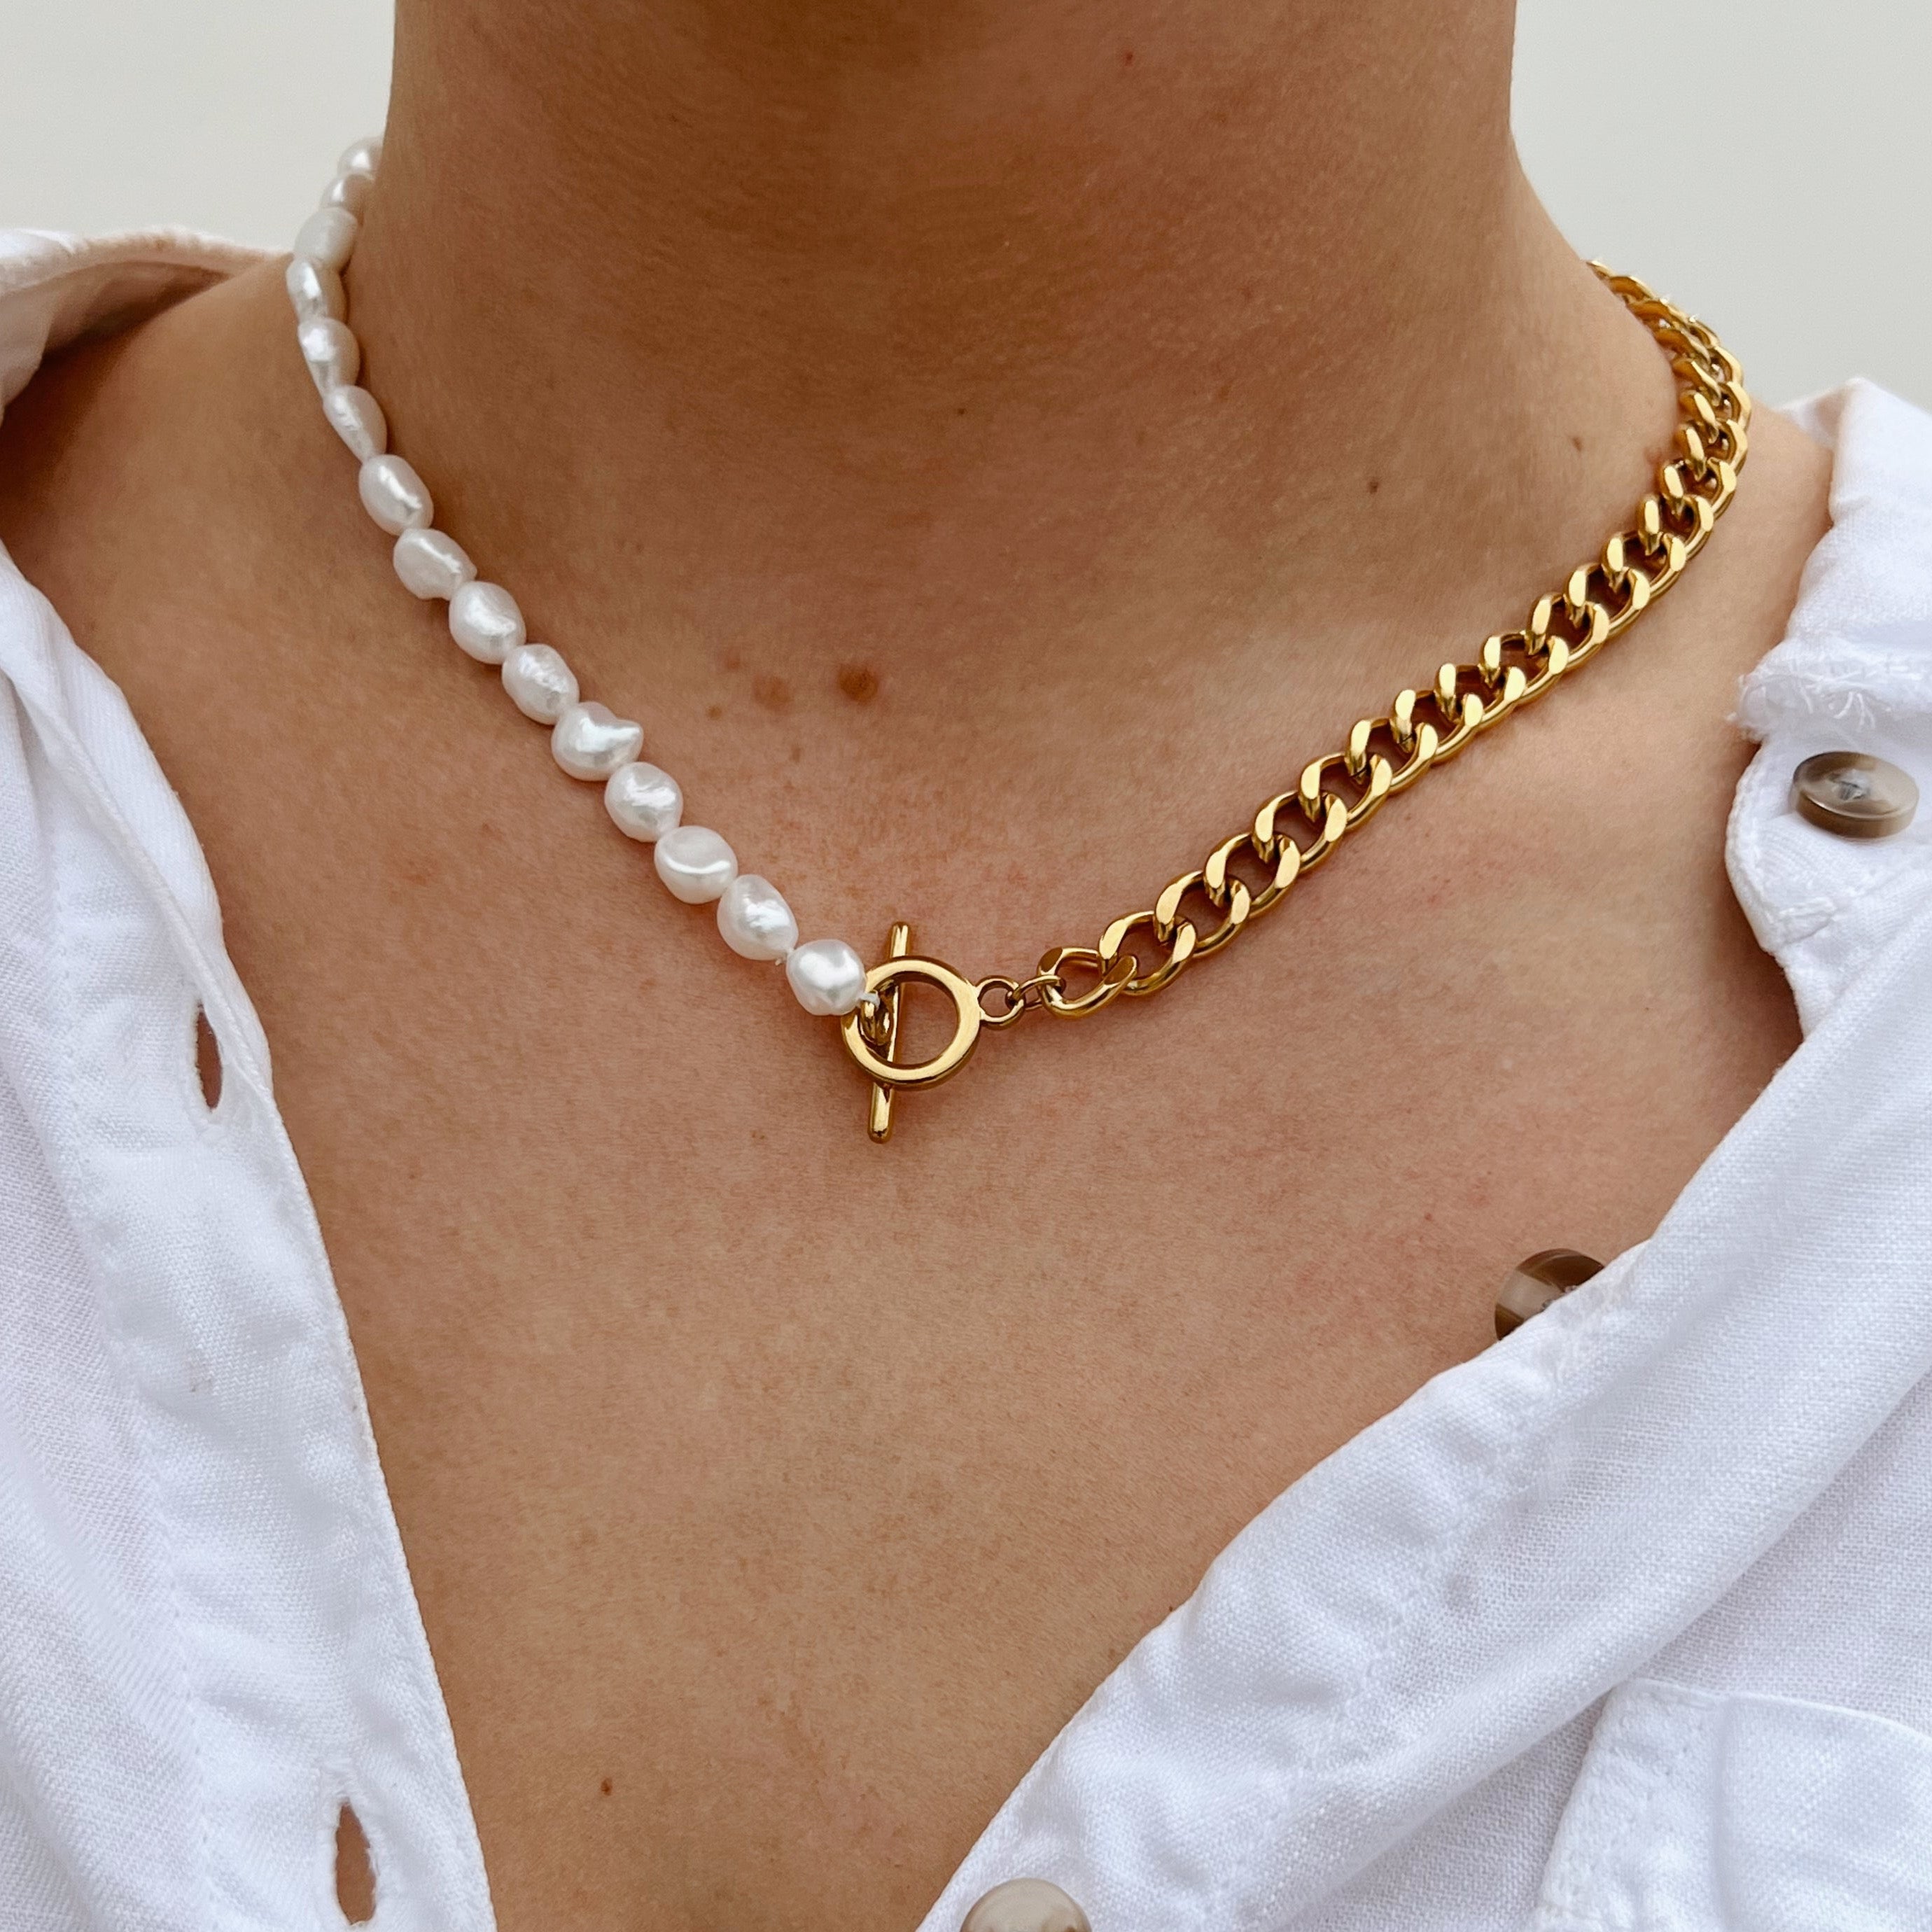 Girl wearing white shirt with pearl and chain necklace